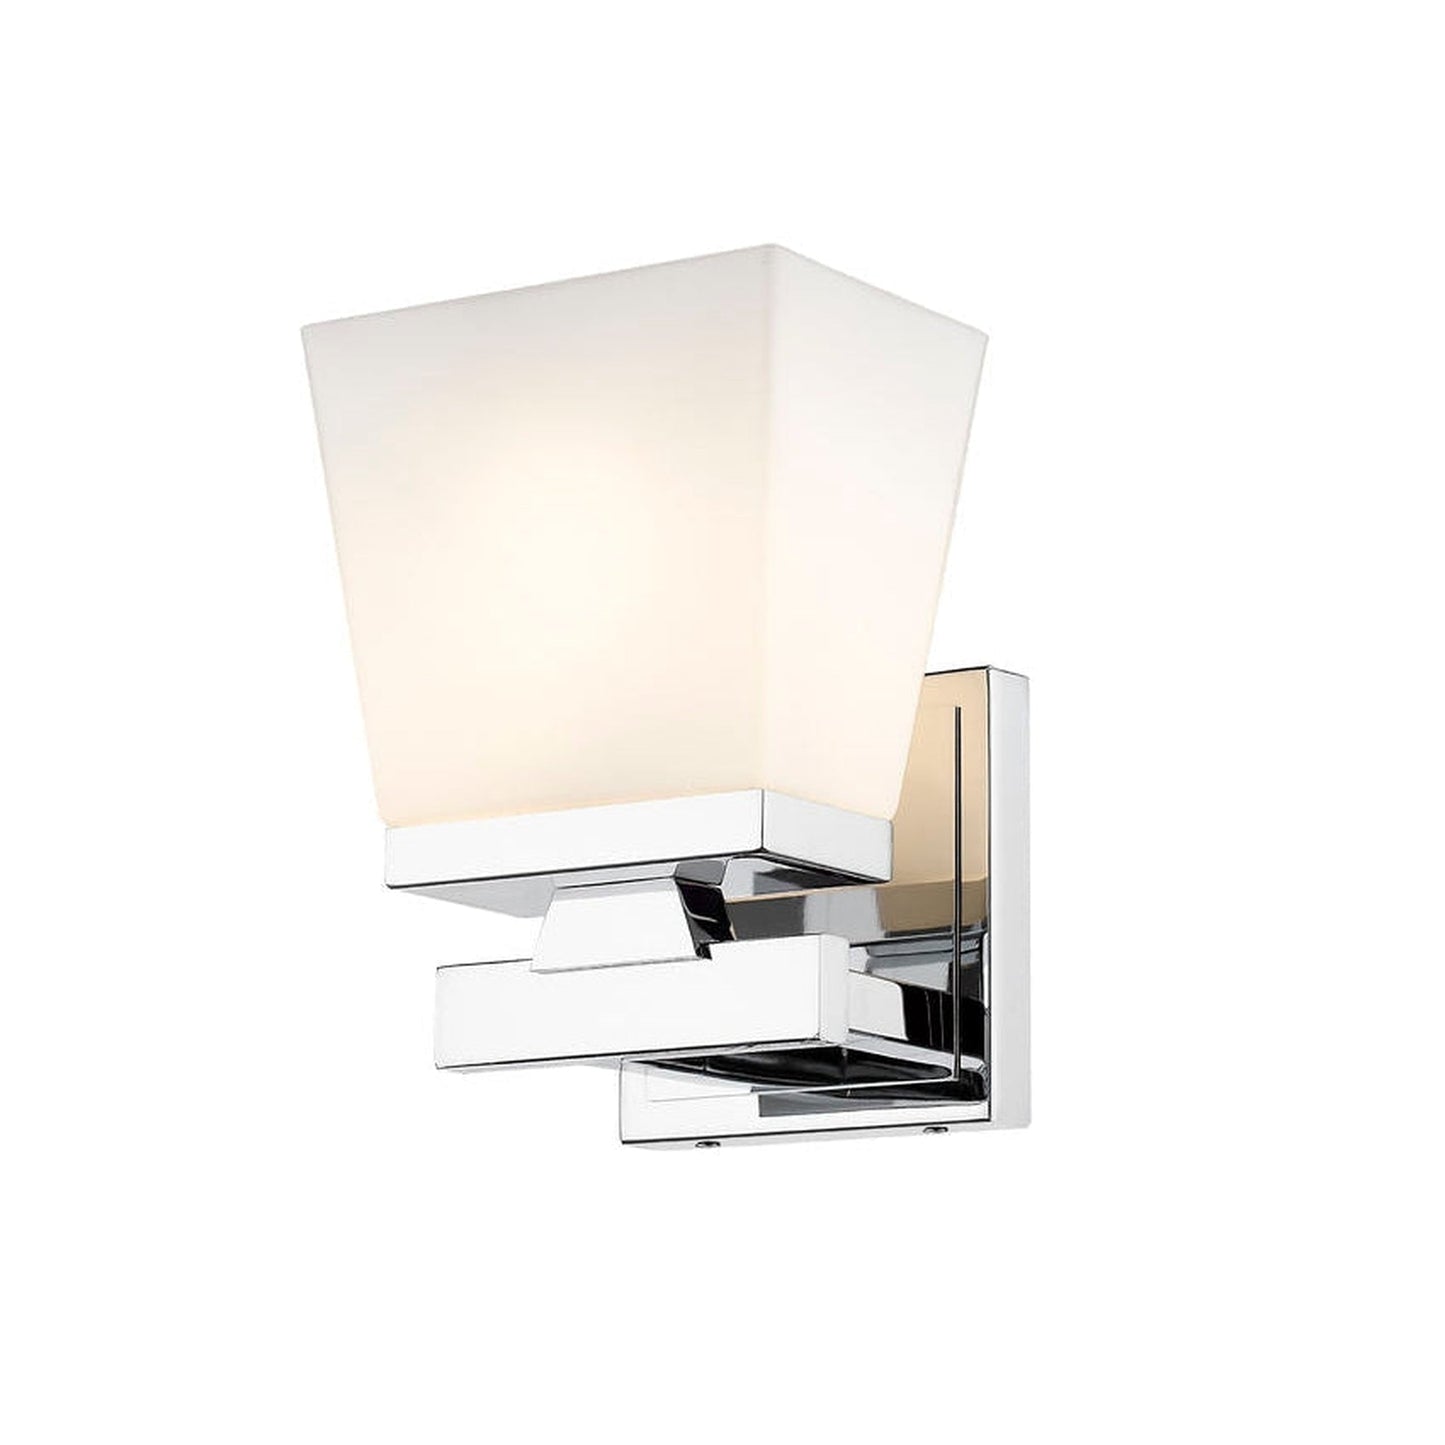 Z-Lite Astor 6" 1-Light Chrome Wall Sconce With Etched Opal Glass Shade